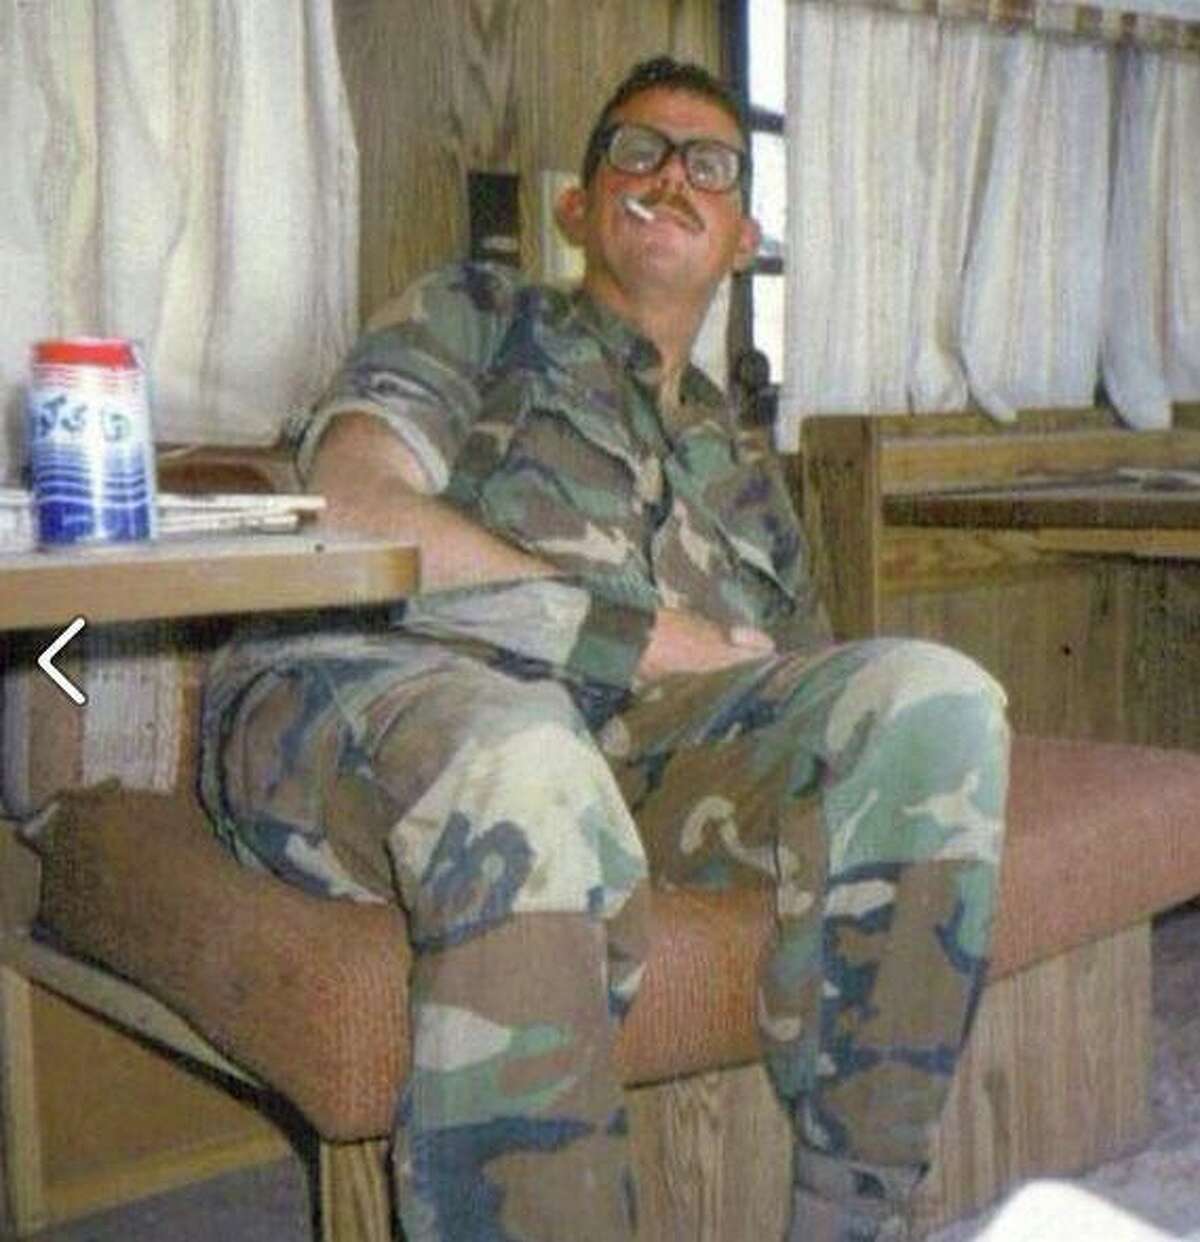 Mike Glenn: "A few minutes after our last gunfight. I'm sitting in a captured Iraqi Republican Guard trailer, smoking a cig and drinking from a can of Haji cola. Good times."